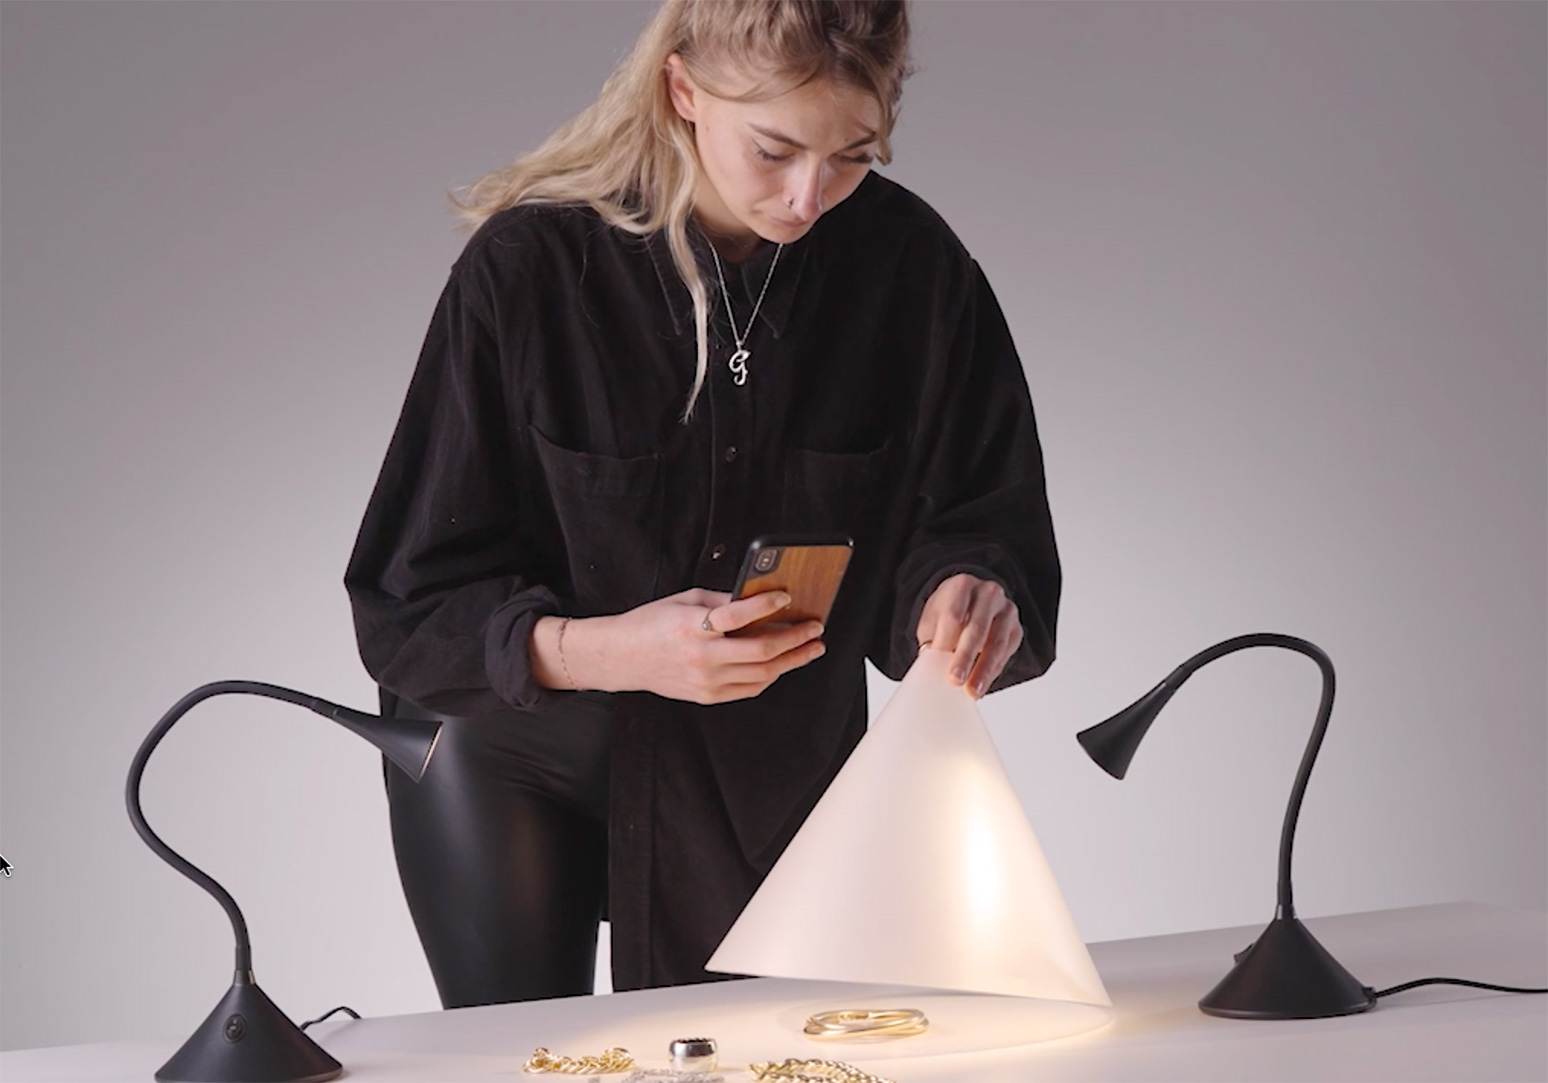 Using Light Cone with desk lamps